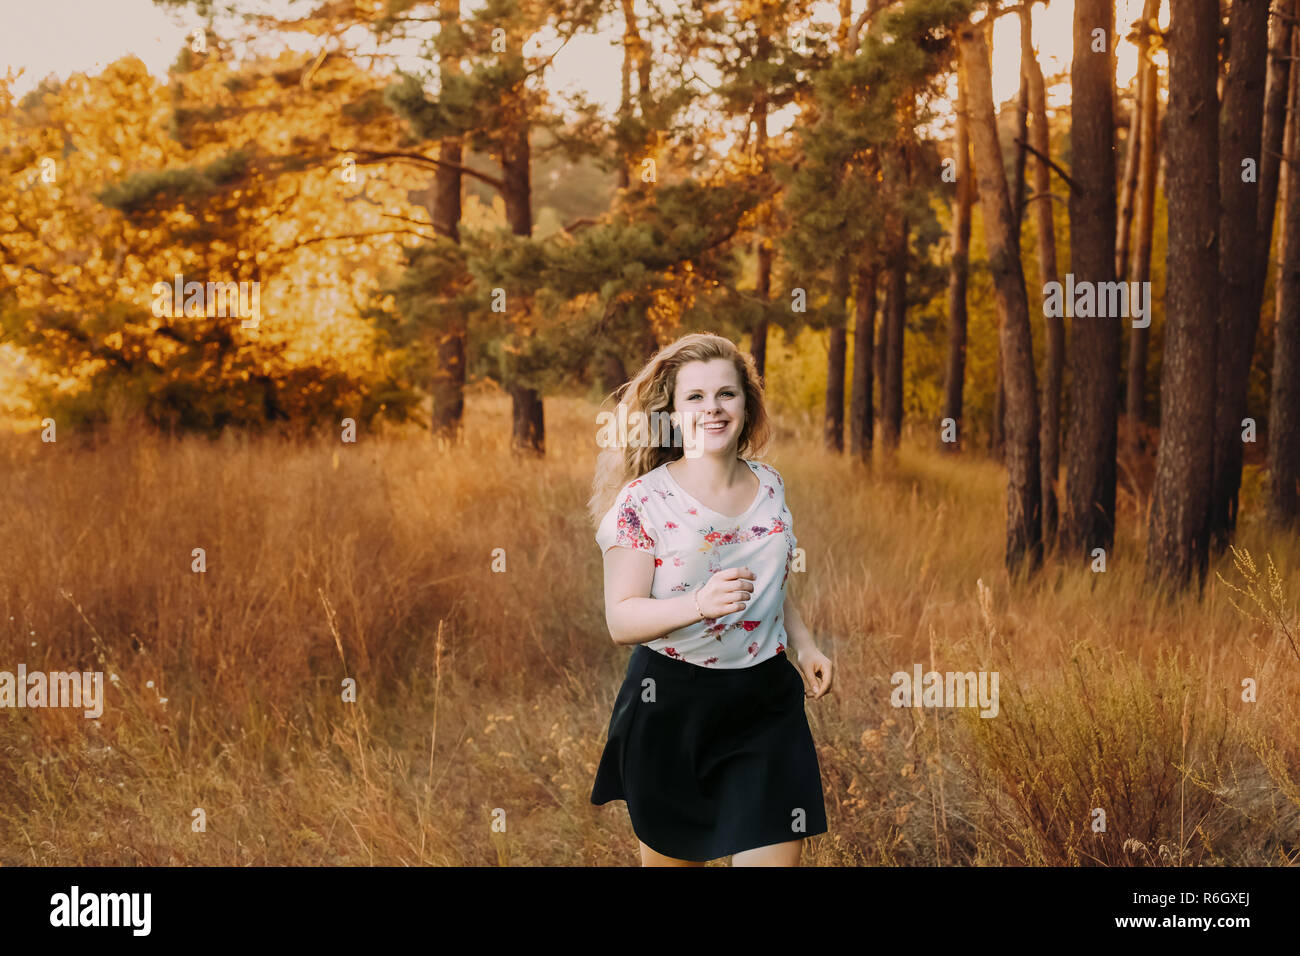 Single Young Pretty Plus Size Caucasian Happy Girl Woman In White T-Shirt Running In Autumn Forest. Enjoy Outdoor Fall Nature. Stock Photo